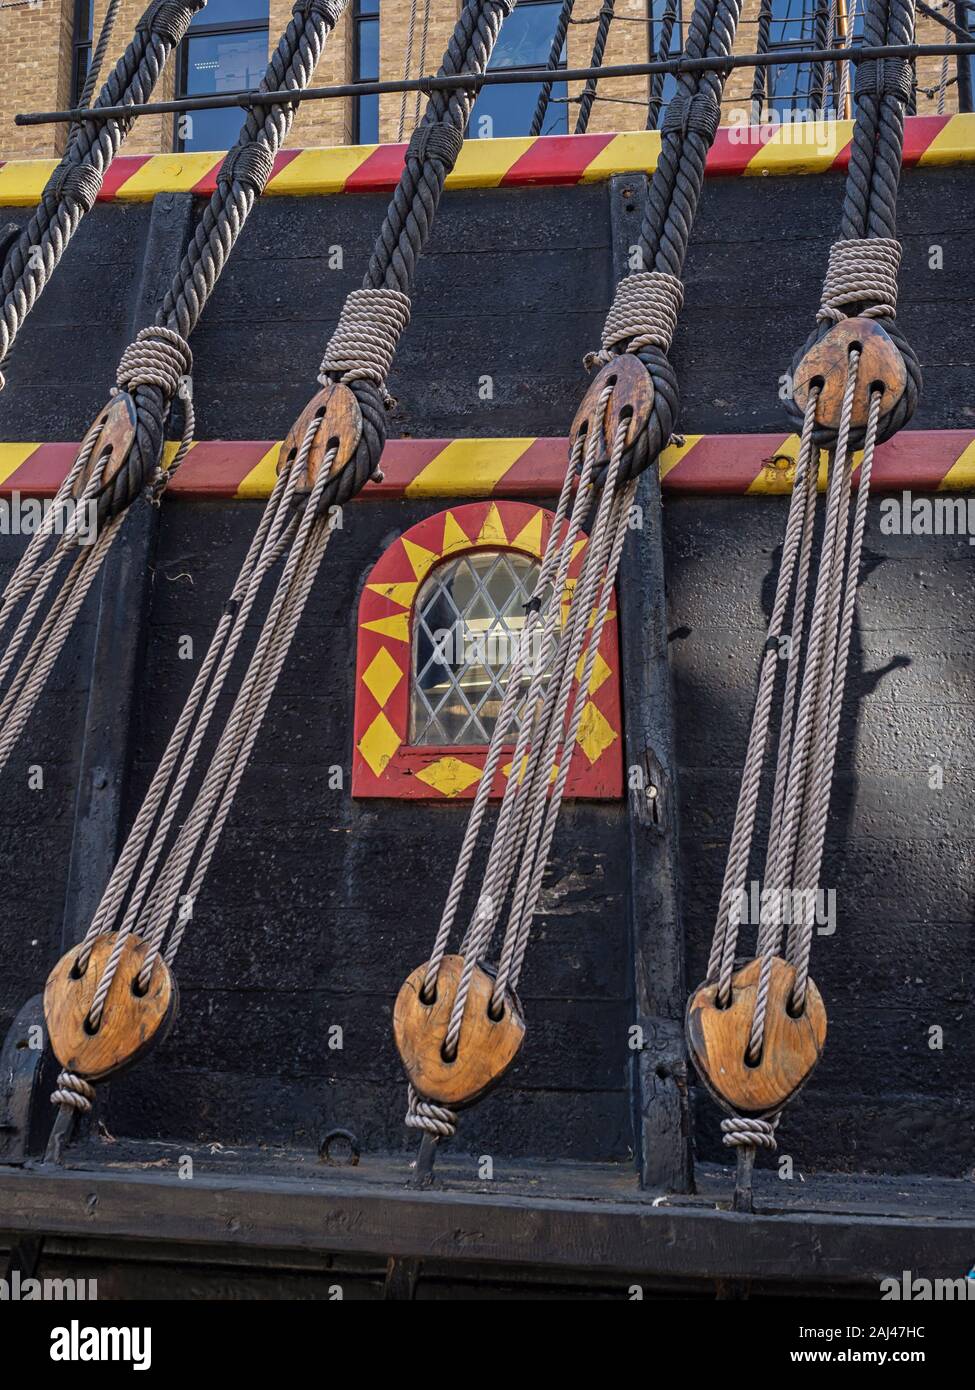 LONDON, UK - SEPTEMBER 29, 2019:  Rigging Ropes on the replica of the Golden Hinde ship Stock Photo